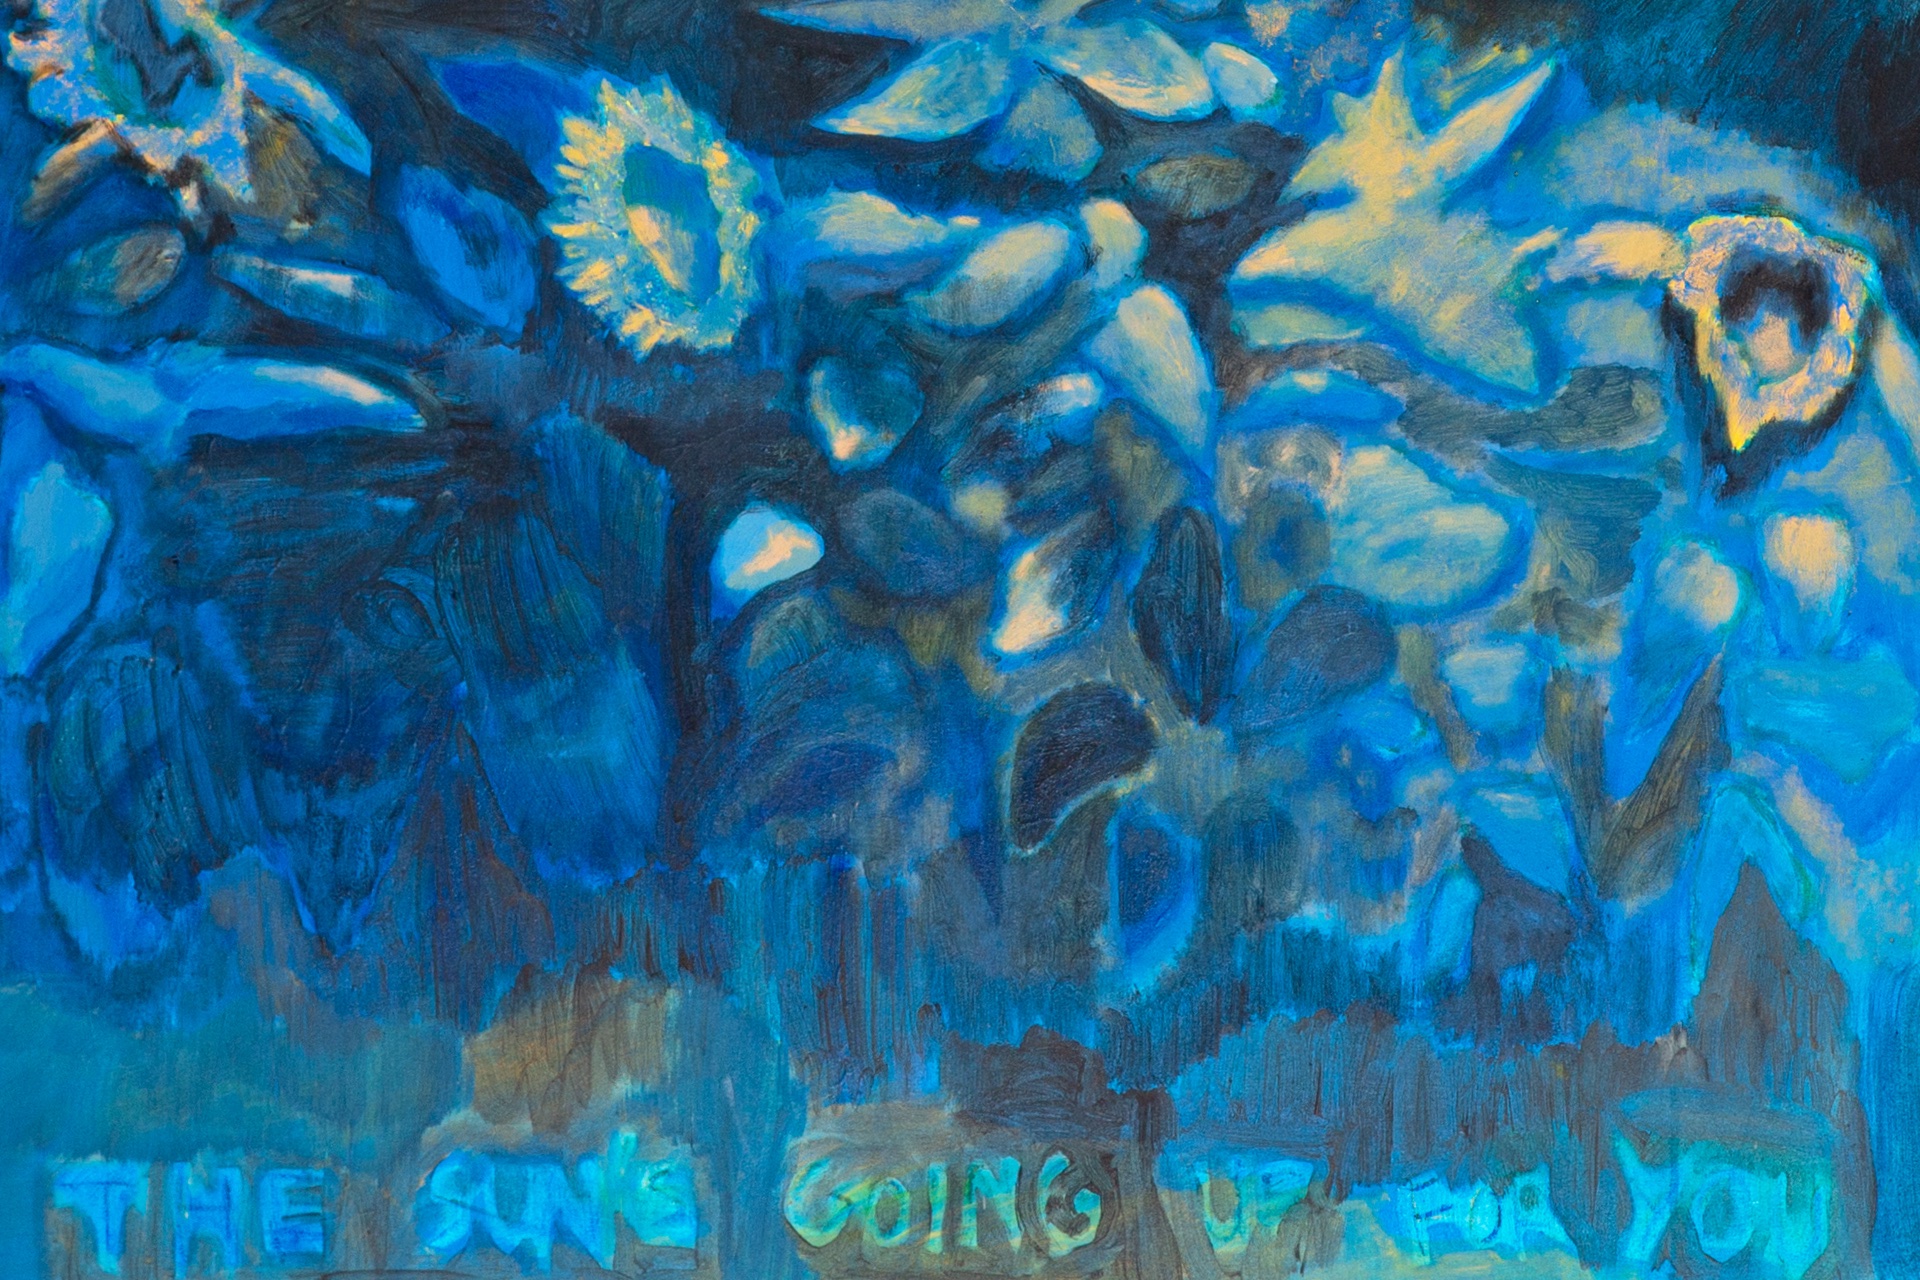 a close up of painting 'small memories', depicting sunflowers in darkness. text at bottom reads 